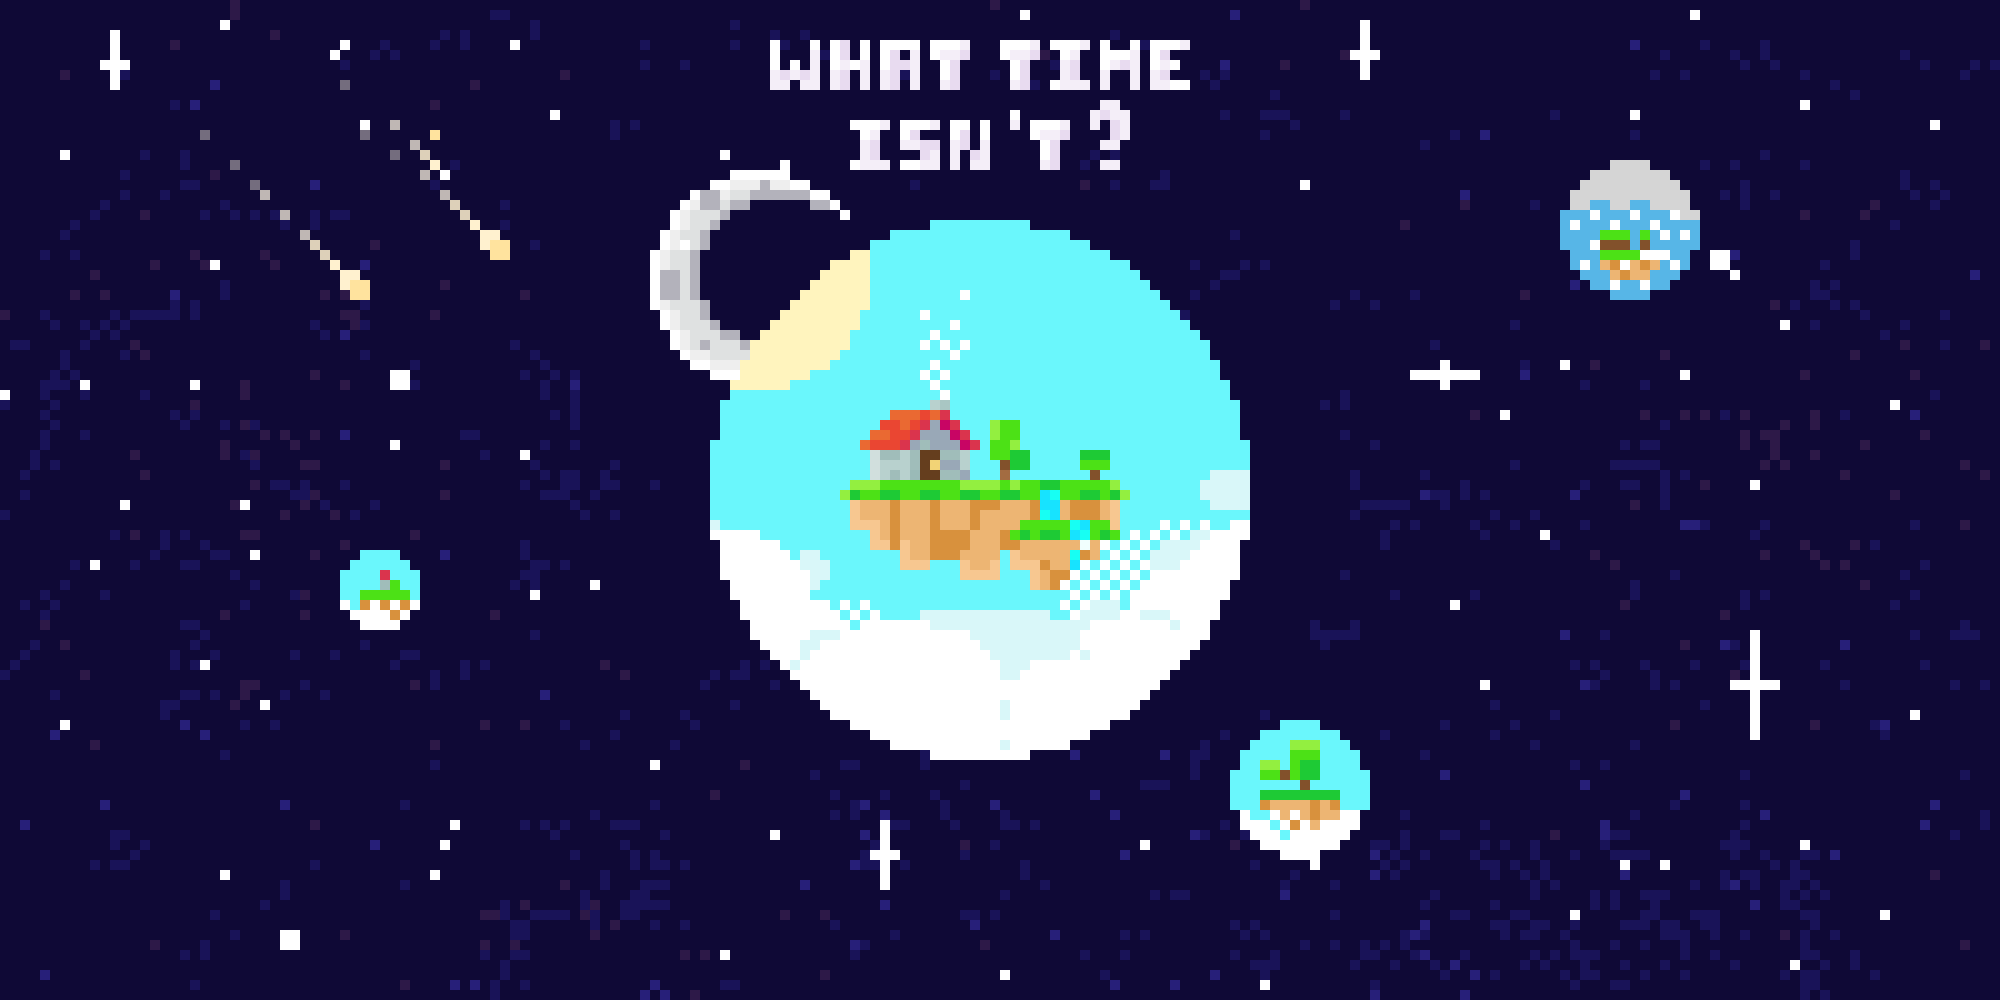 What time isn't